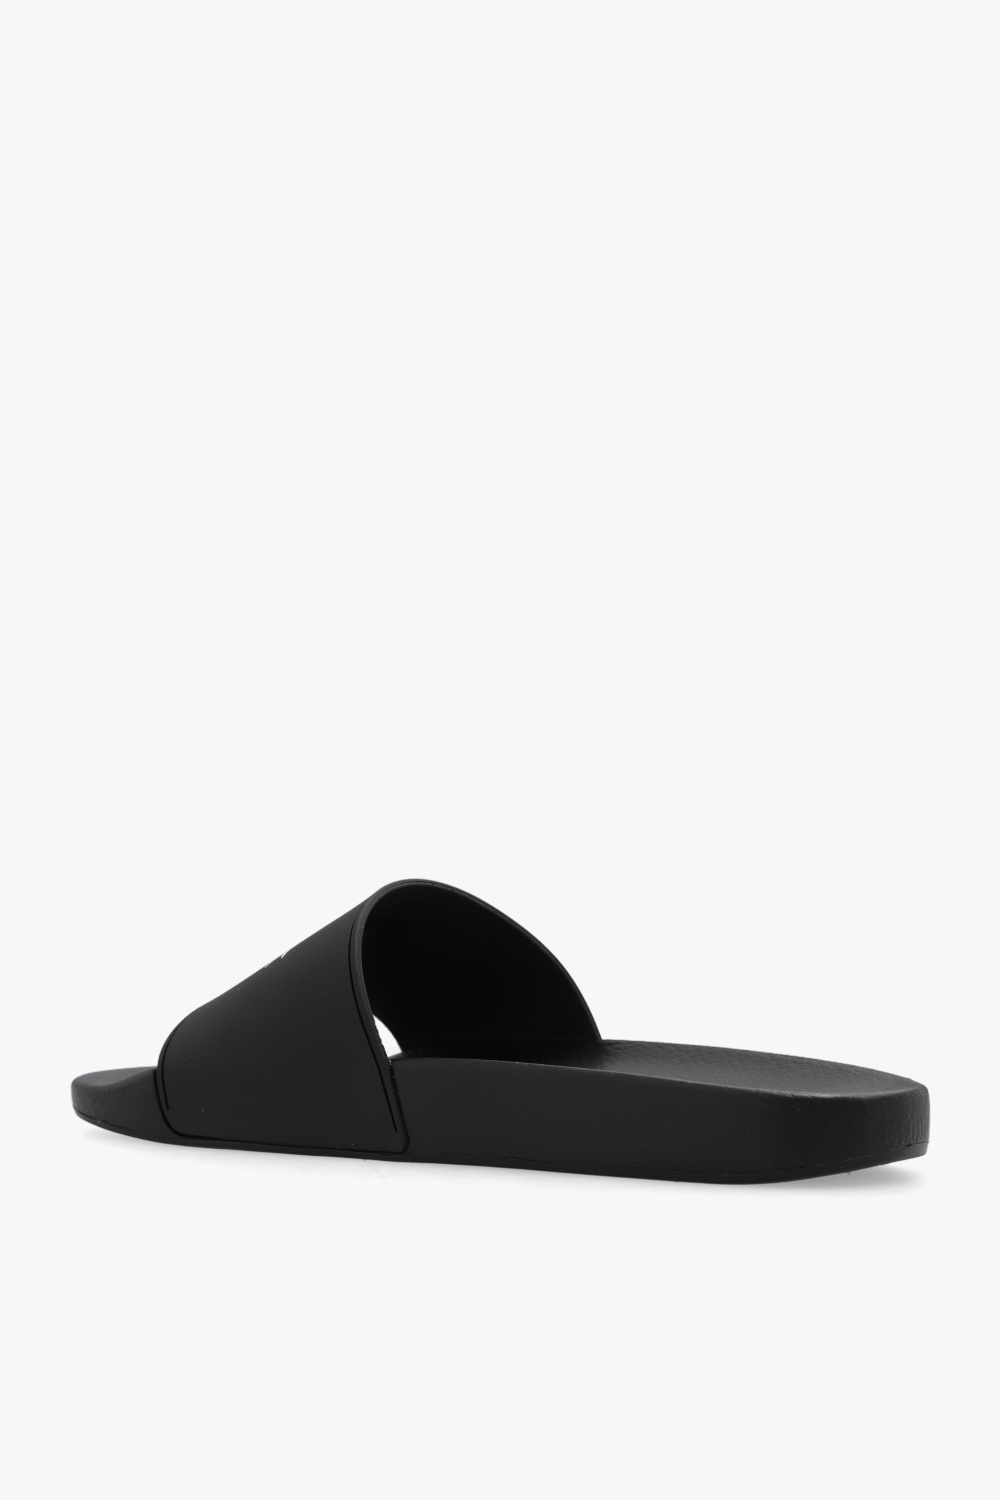 Rick Owens DRKSHDW The real highlight of the shoe is the traction